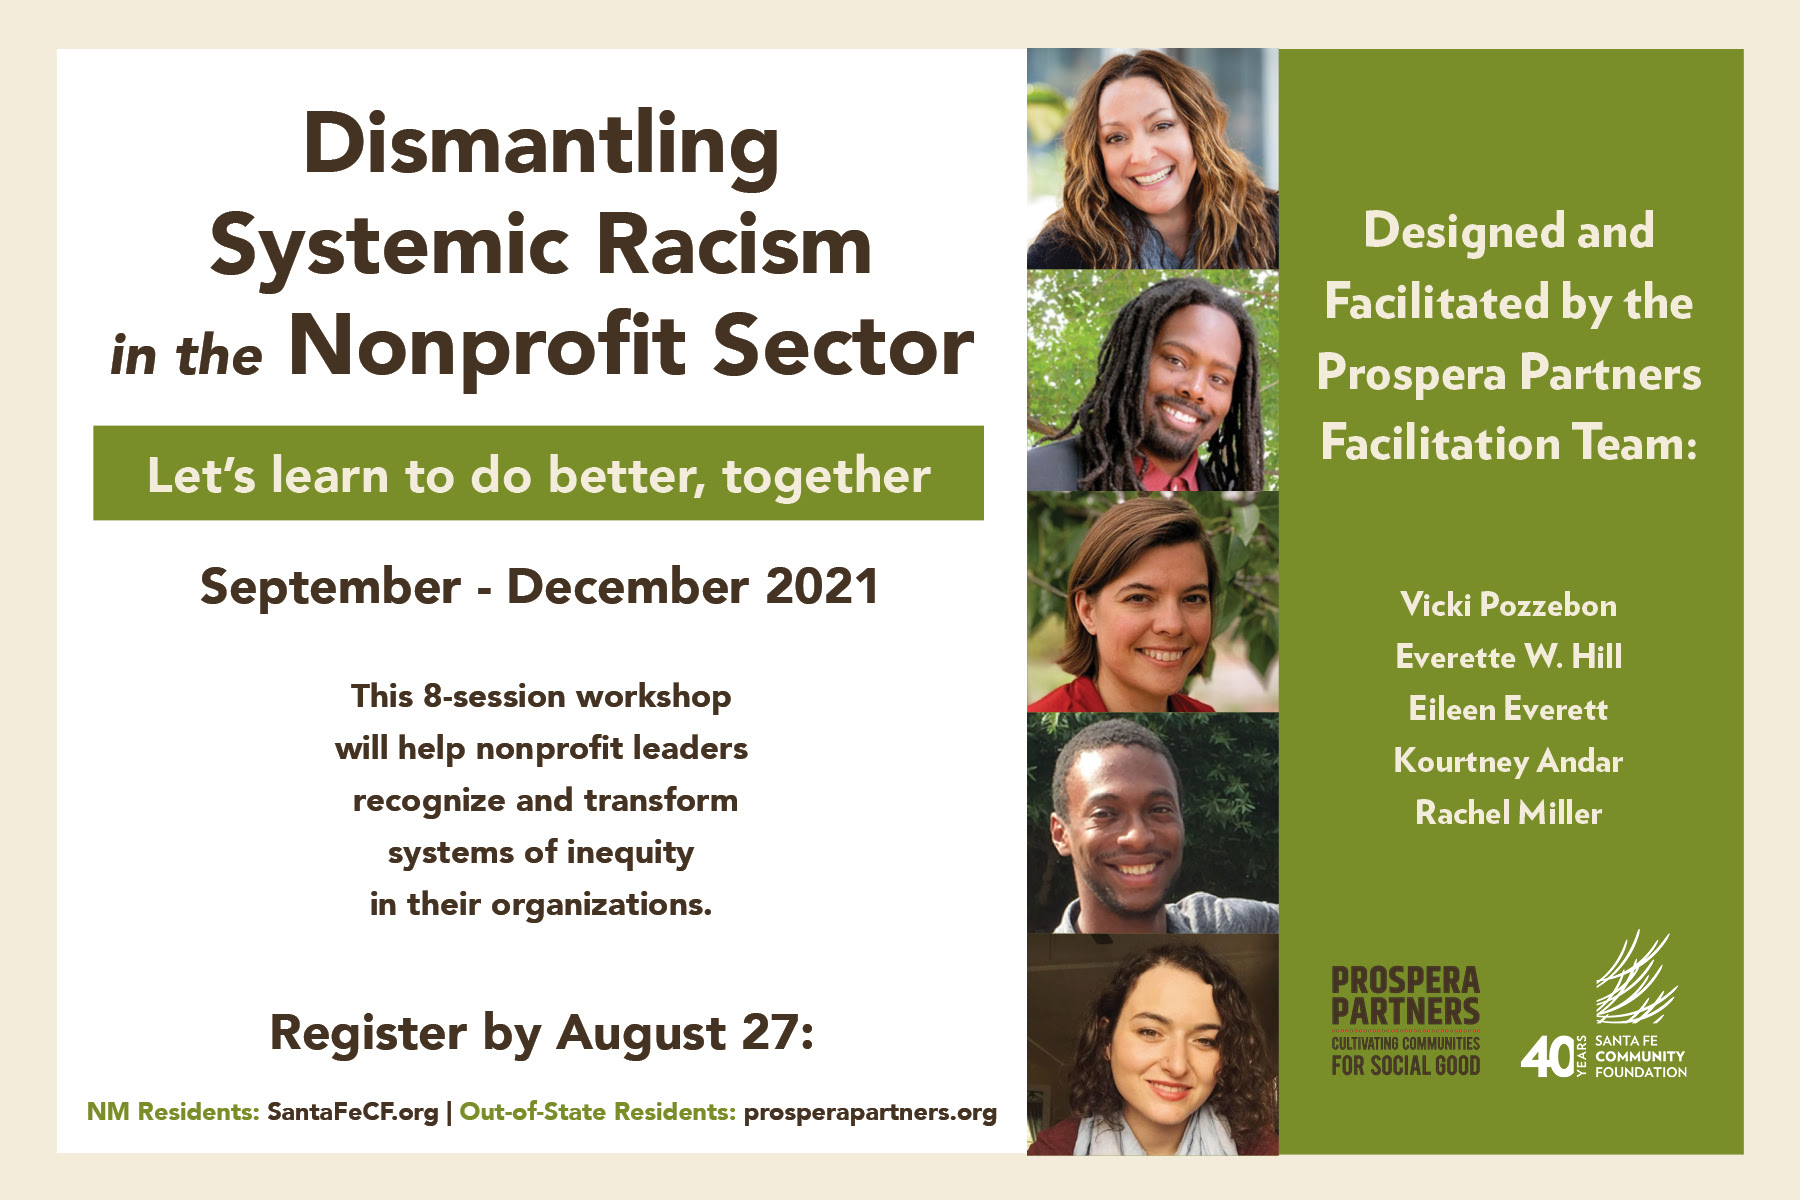 A poster advertising a 2021 workshop on "Dismantling Racism in the Nonprofit Sector"